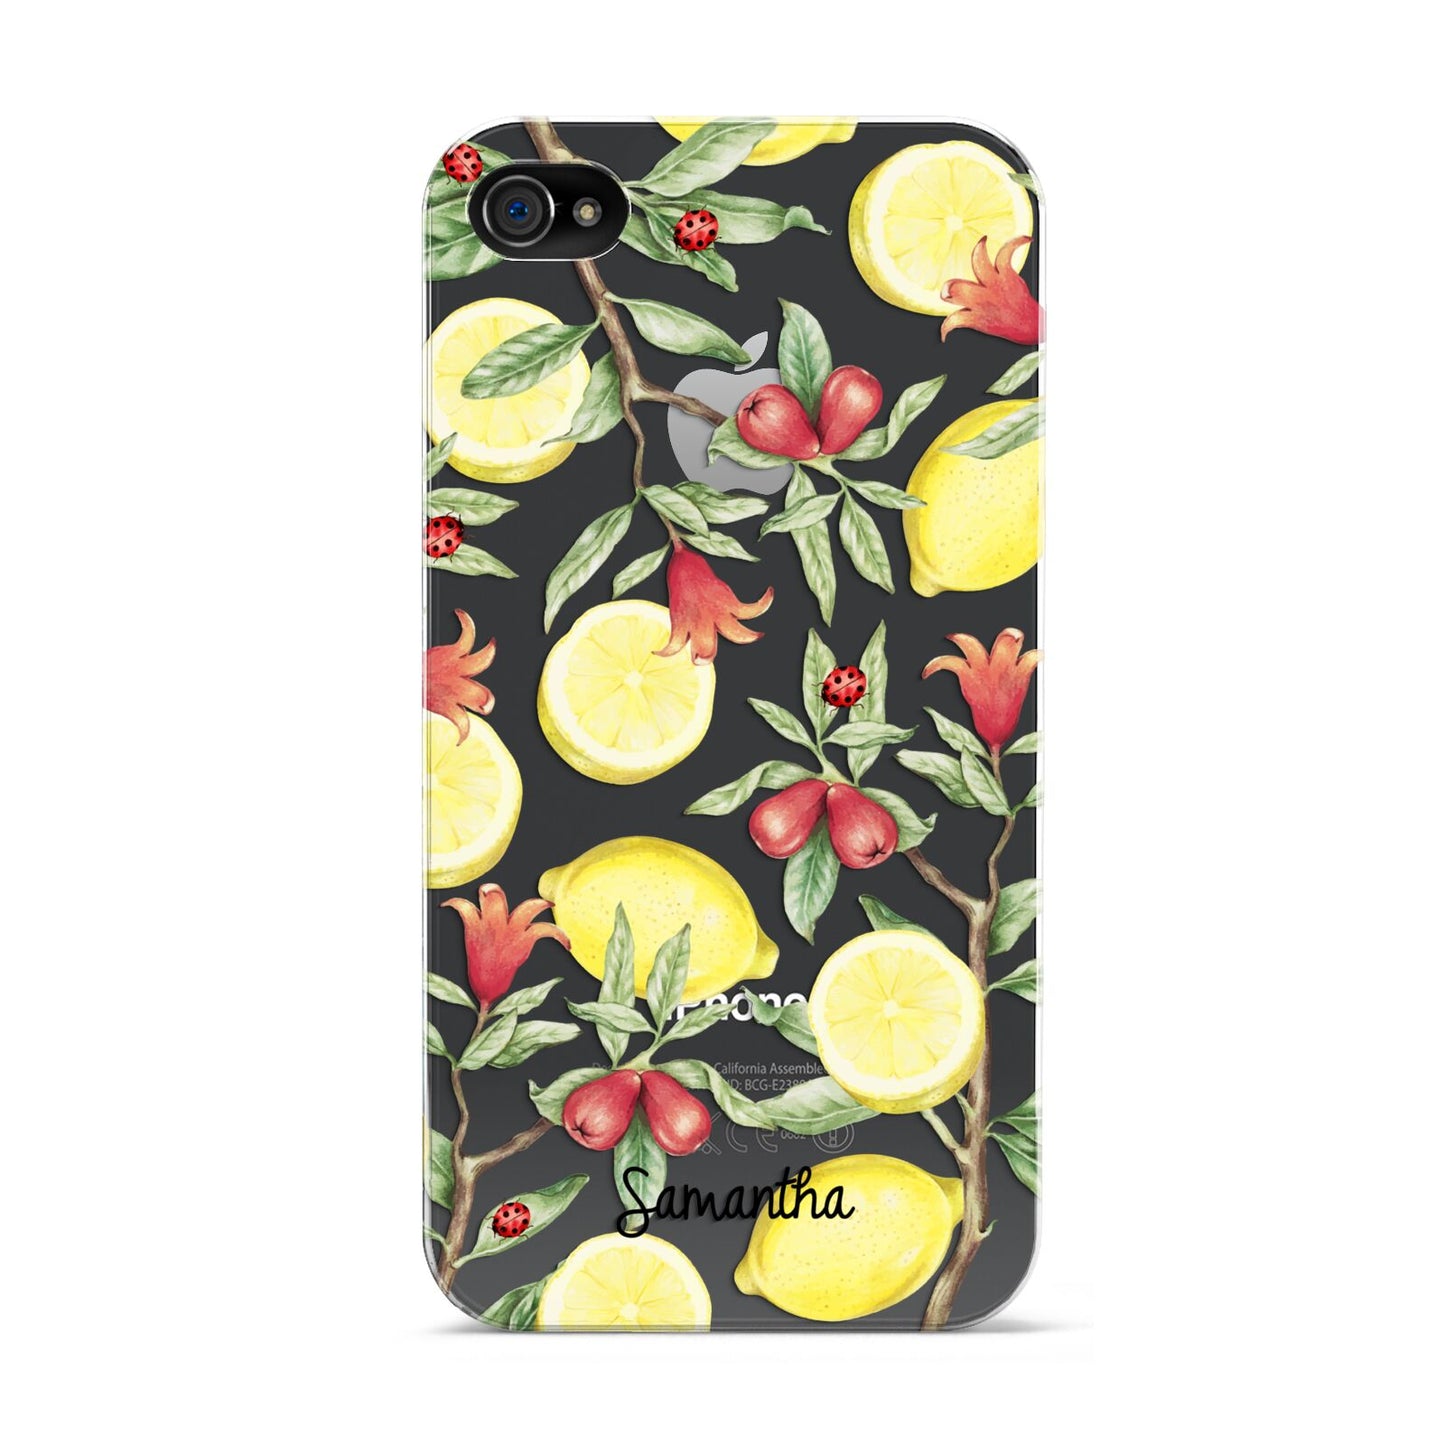 Lemon Tree with Name Apple iPhone 4s Case